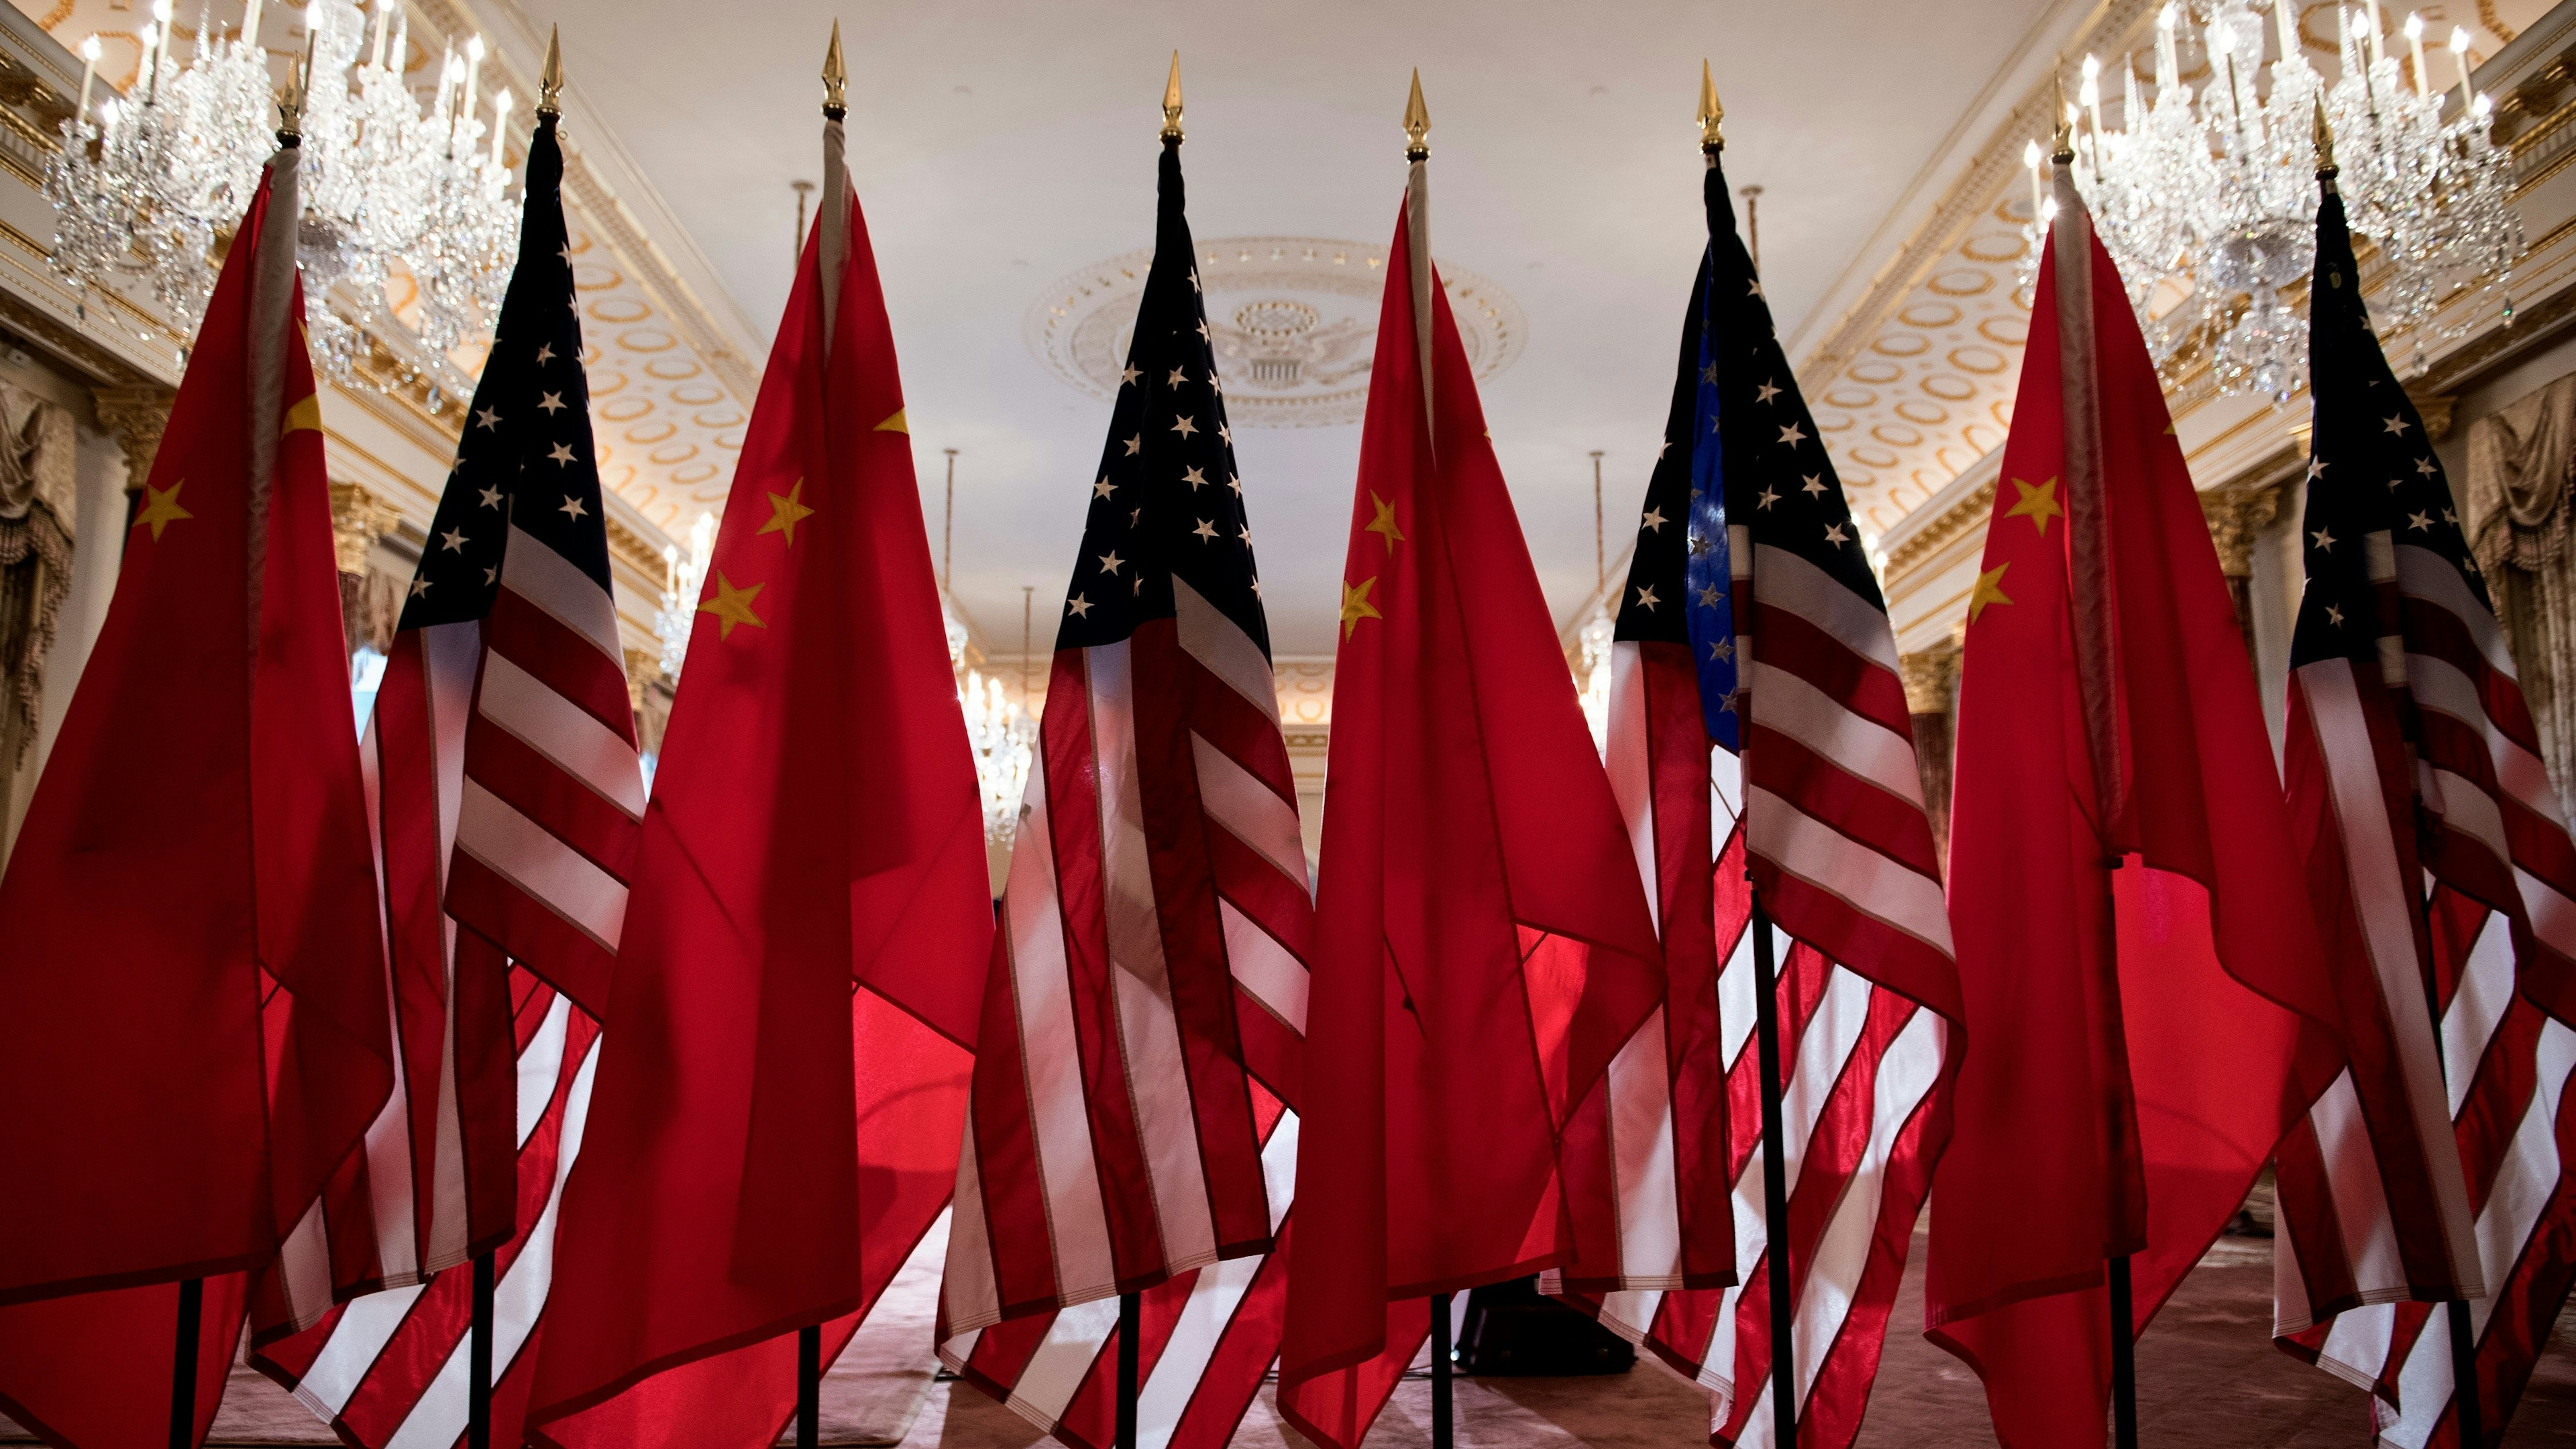 The US and China flags